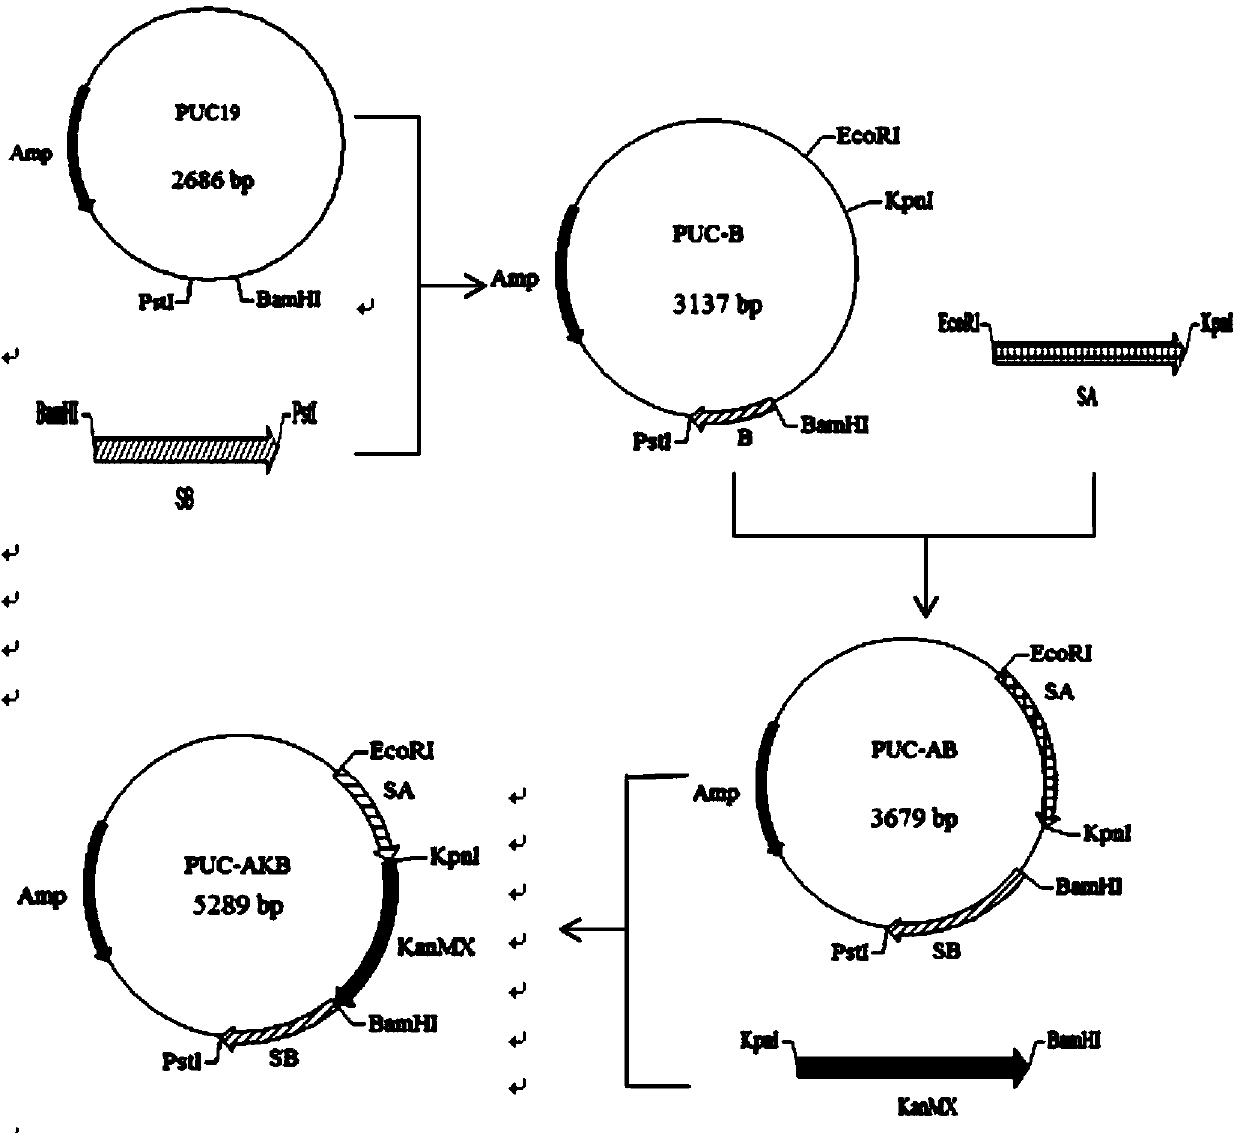 High-activity dry yeast applicable to high-sugar dough fermentation